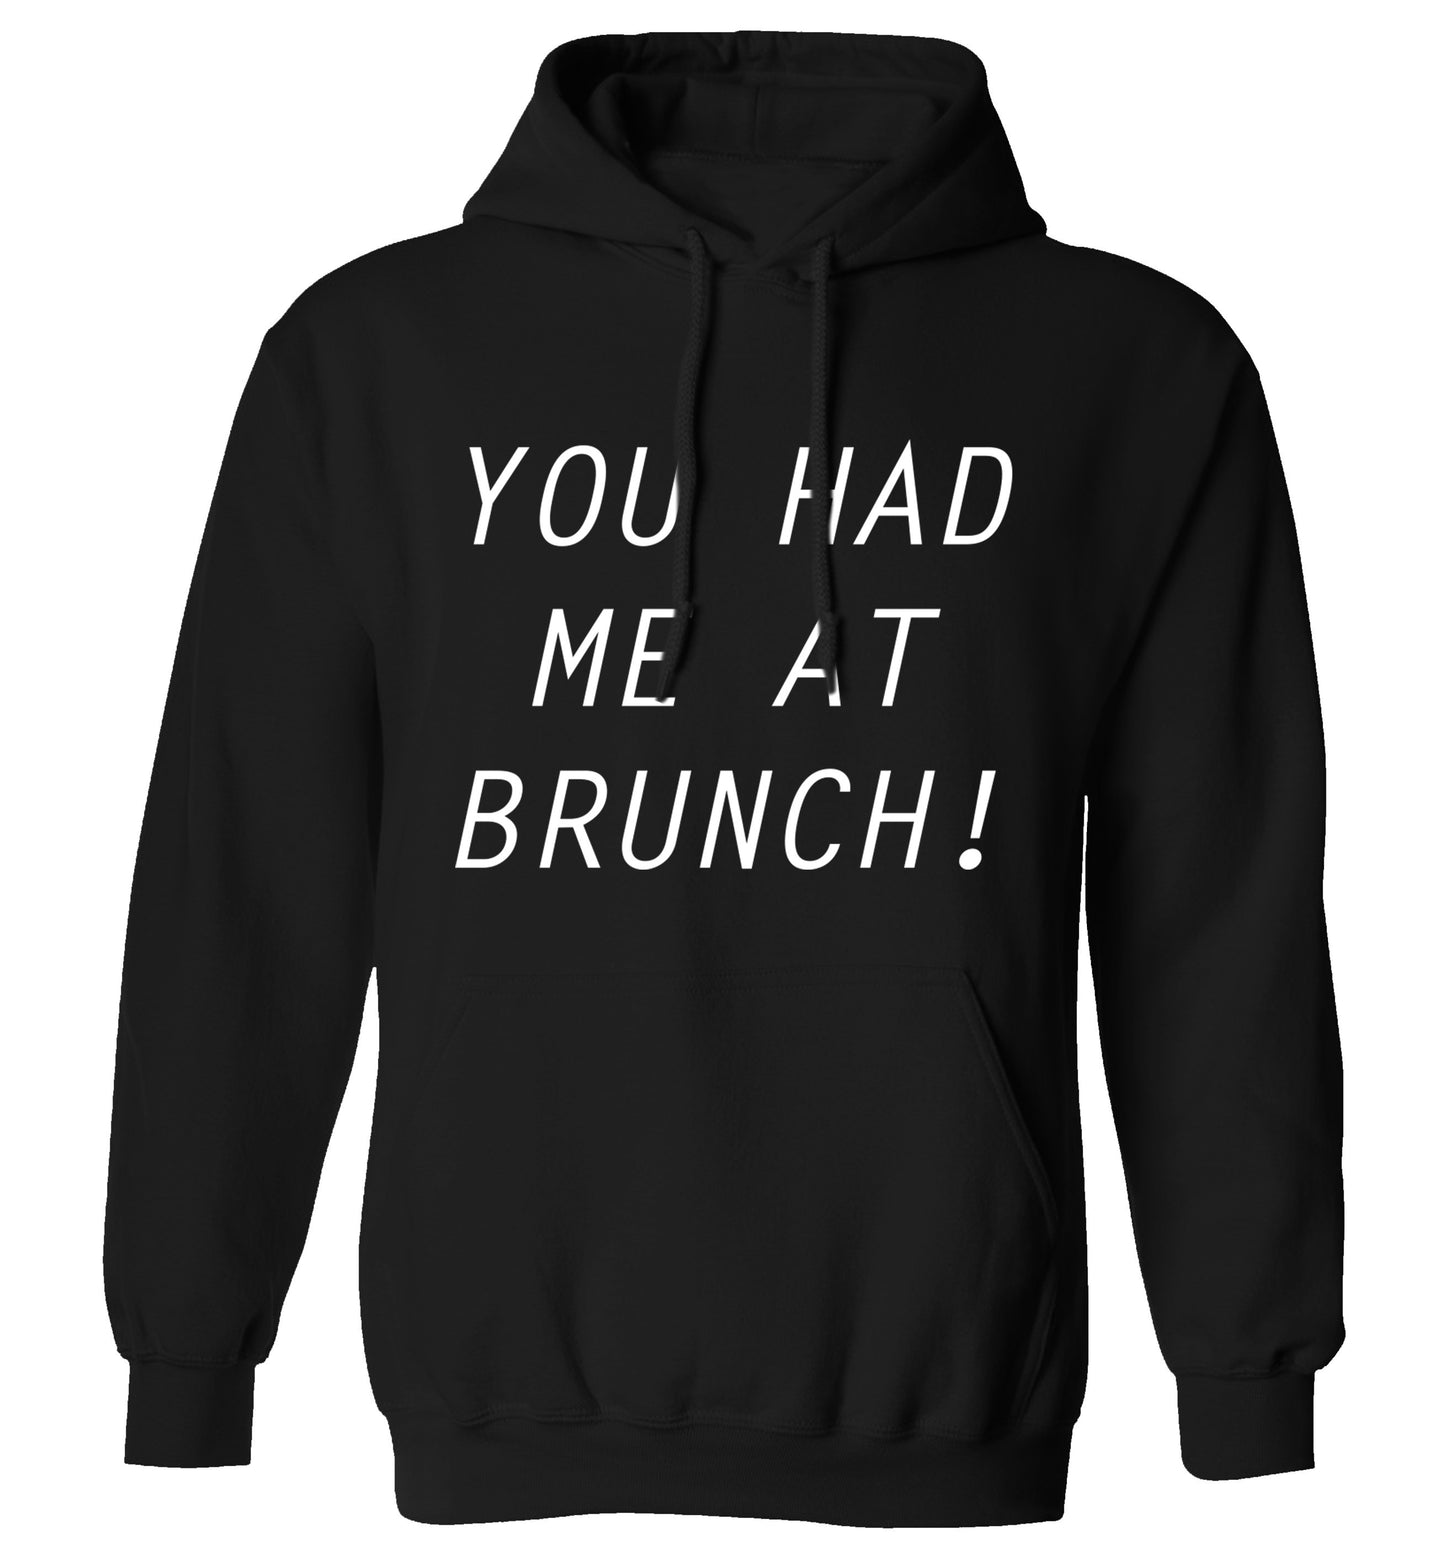 You had me at brunch adults unisex black hoodie 2XL